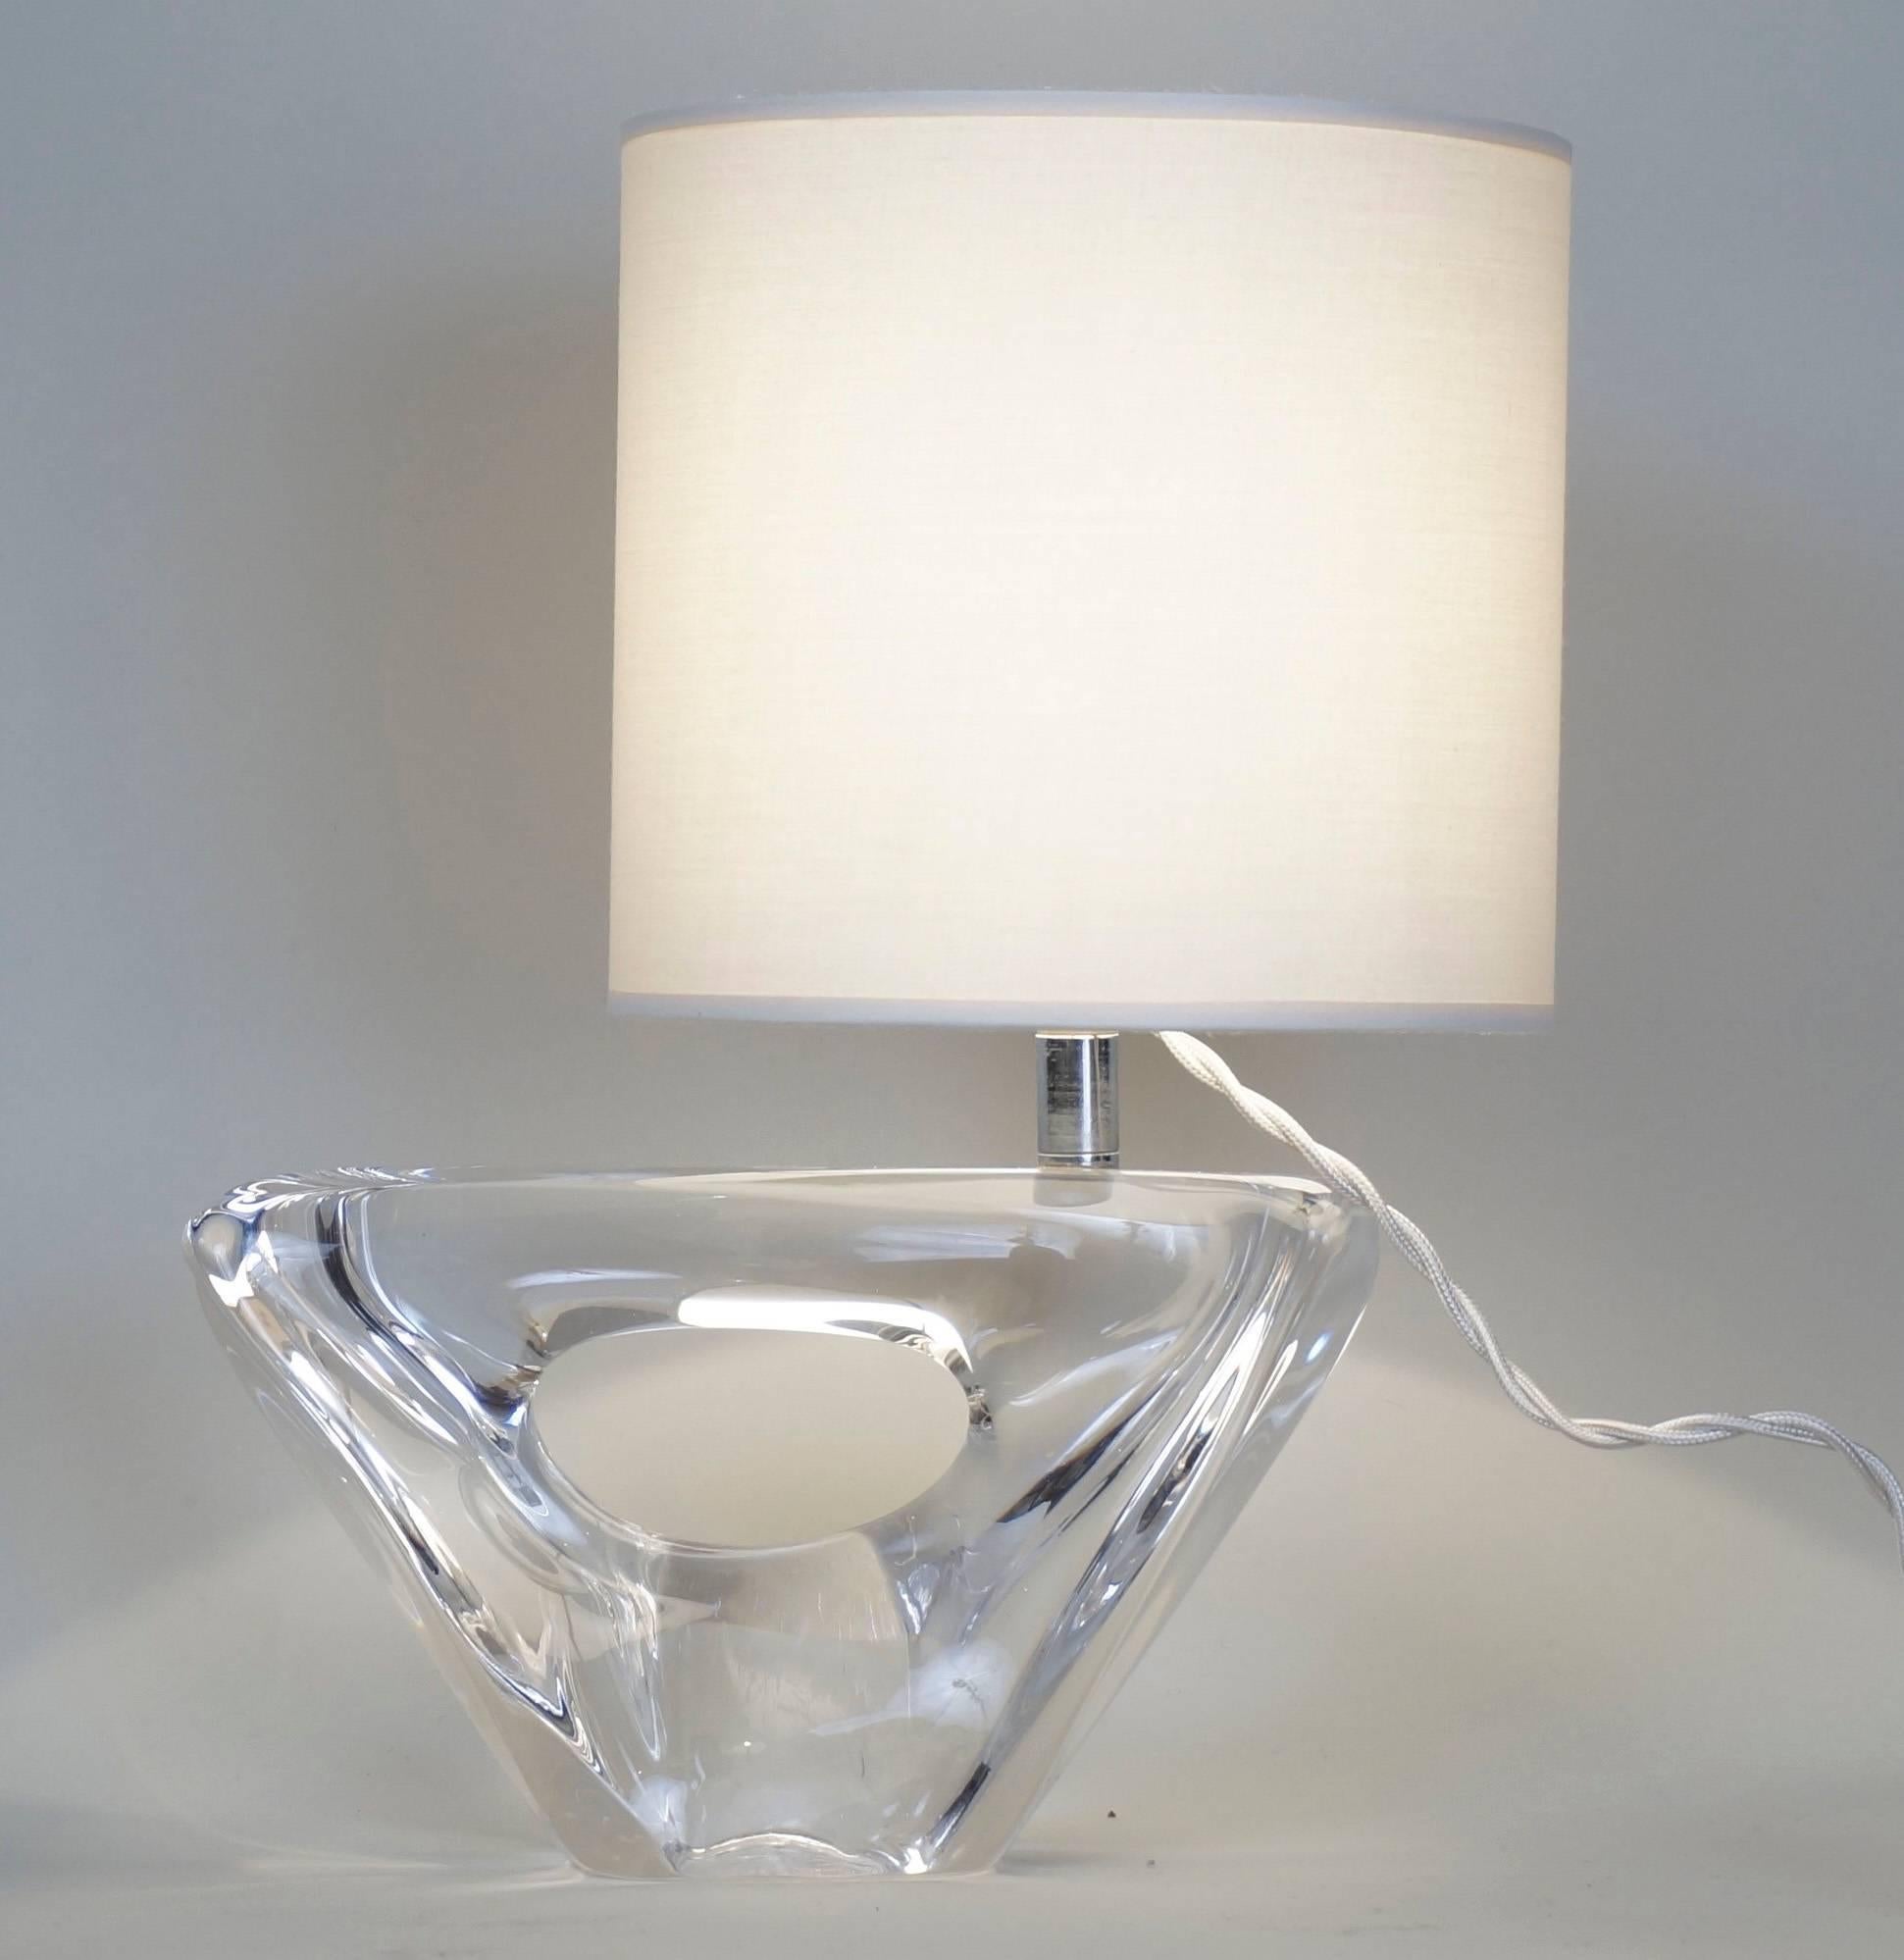 Crystal table lamp by Daum signed on the base Daum France.
Custom-made fabric lampshades.
Rewired with twisted silk cord.
US standard plug on request.

Measures: Crystal: 12 cm - 4.7 in.
Height with lampshade: 29 cm - 11.4 in.
 